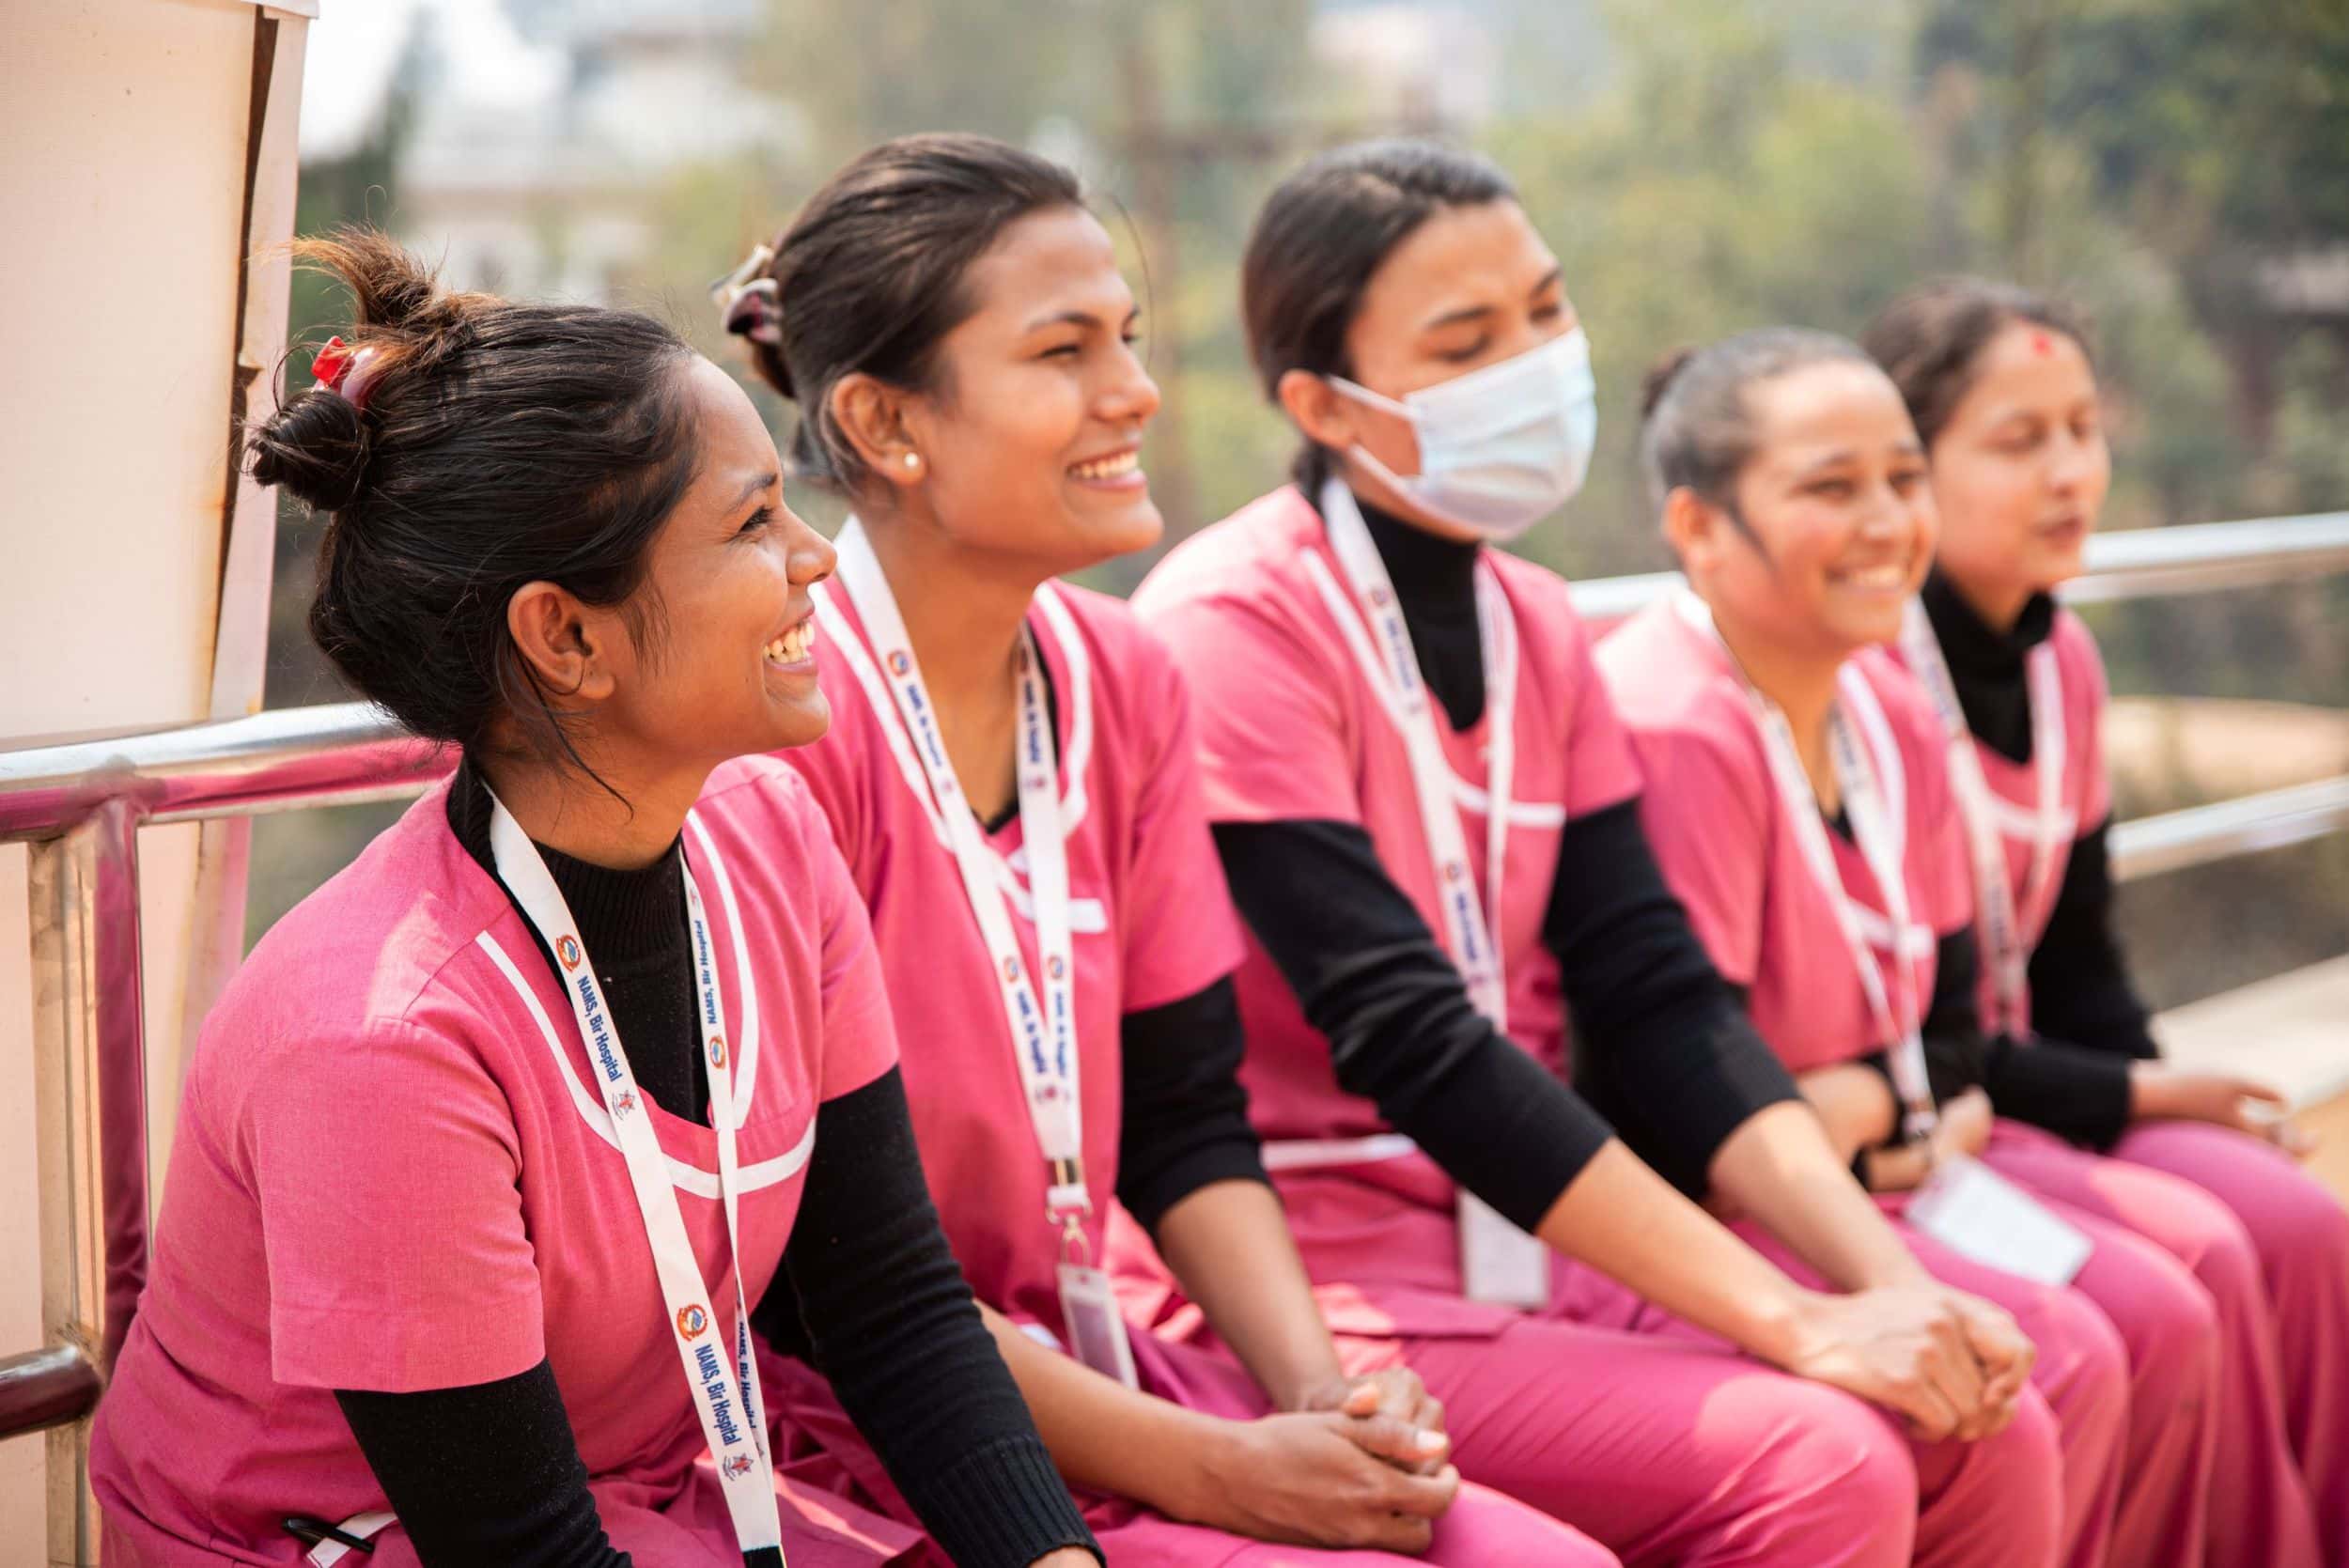 Midwifery education in Nepal: Training the first generation of professional midwives